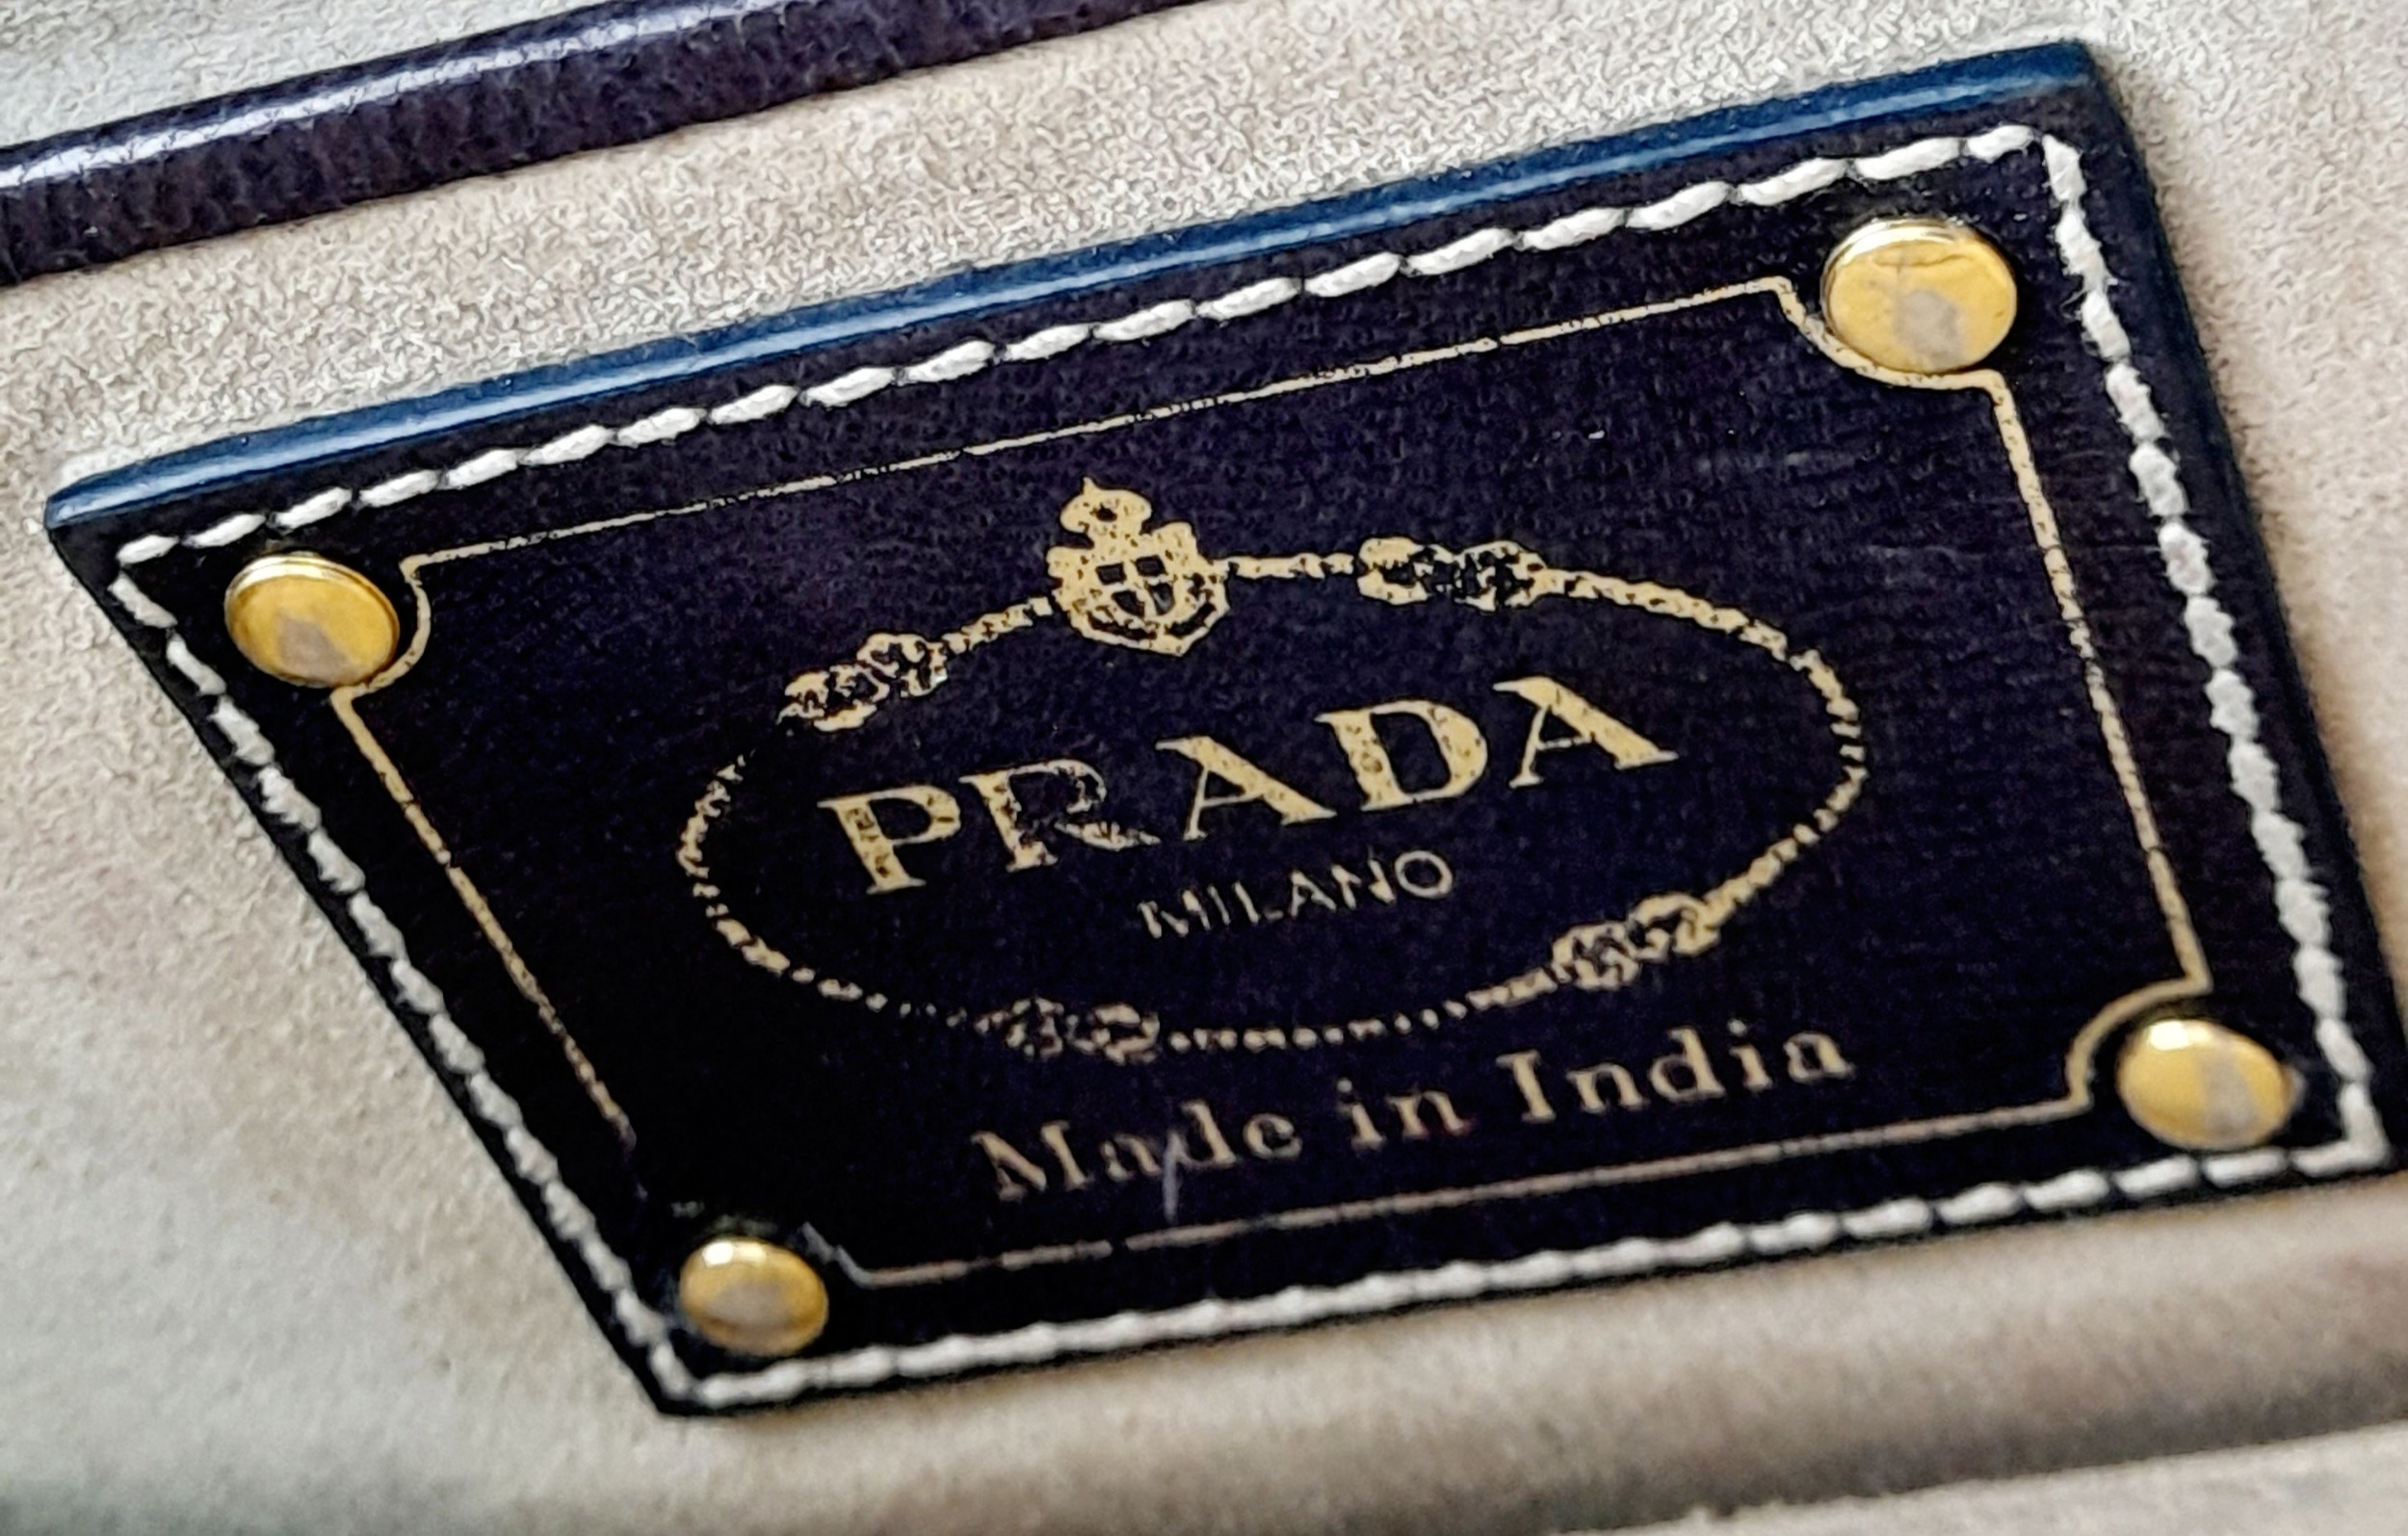 A Prada Black and White 'Madras' Clutch Bag. Woven leather exterior with gold-toned hardware and - Image 7 of 9